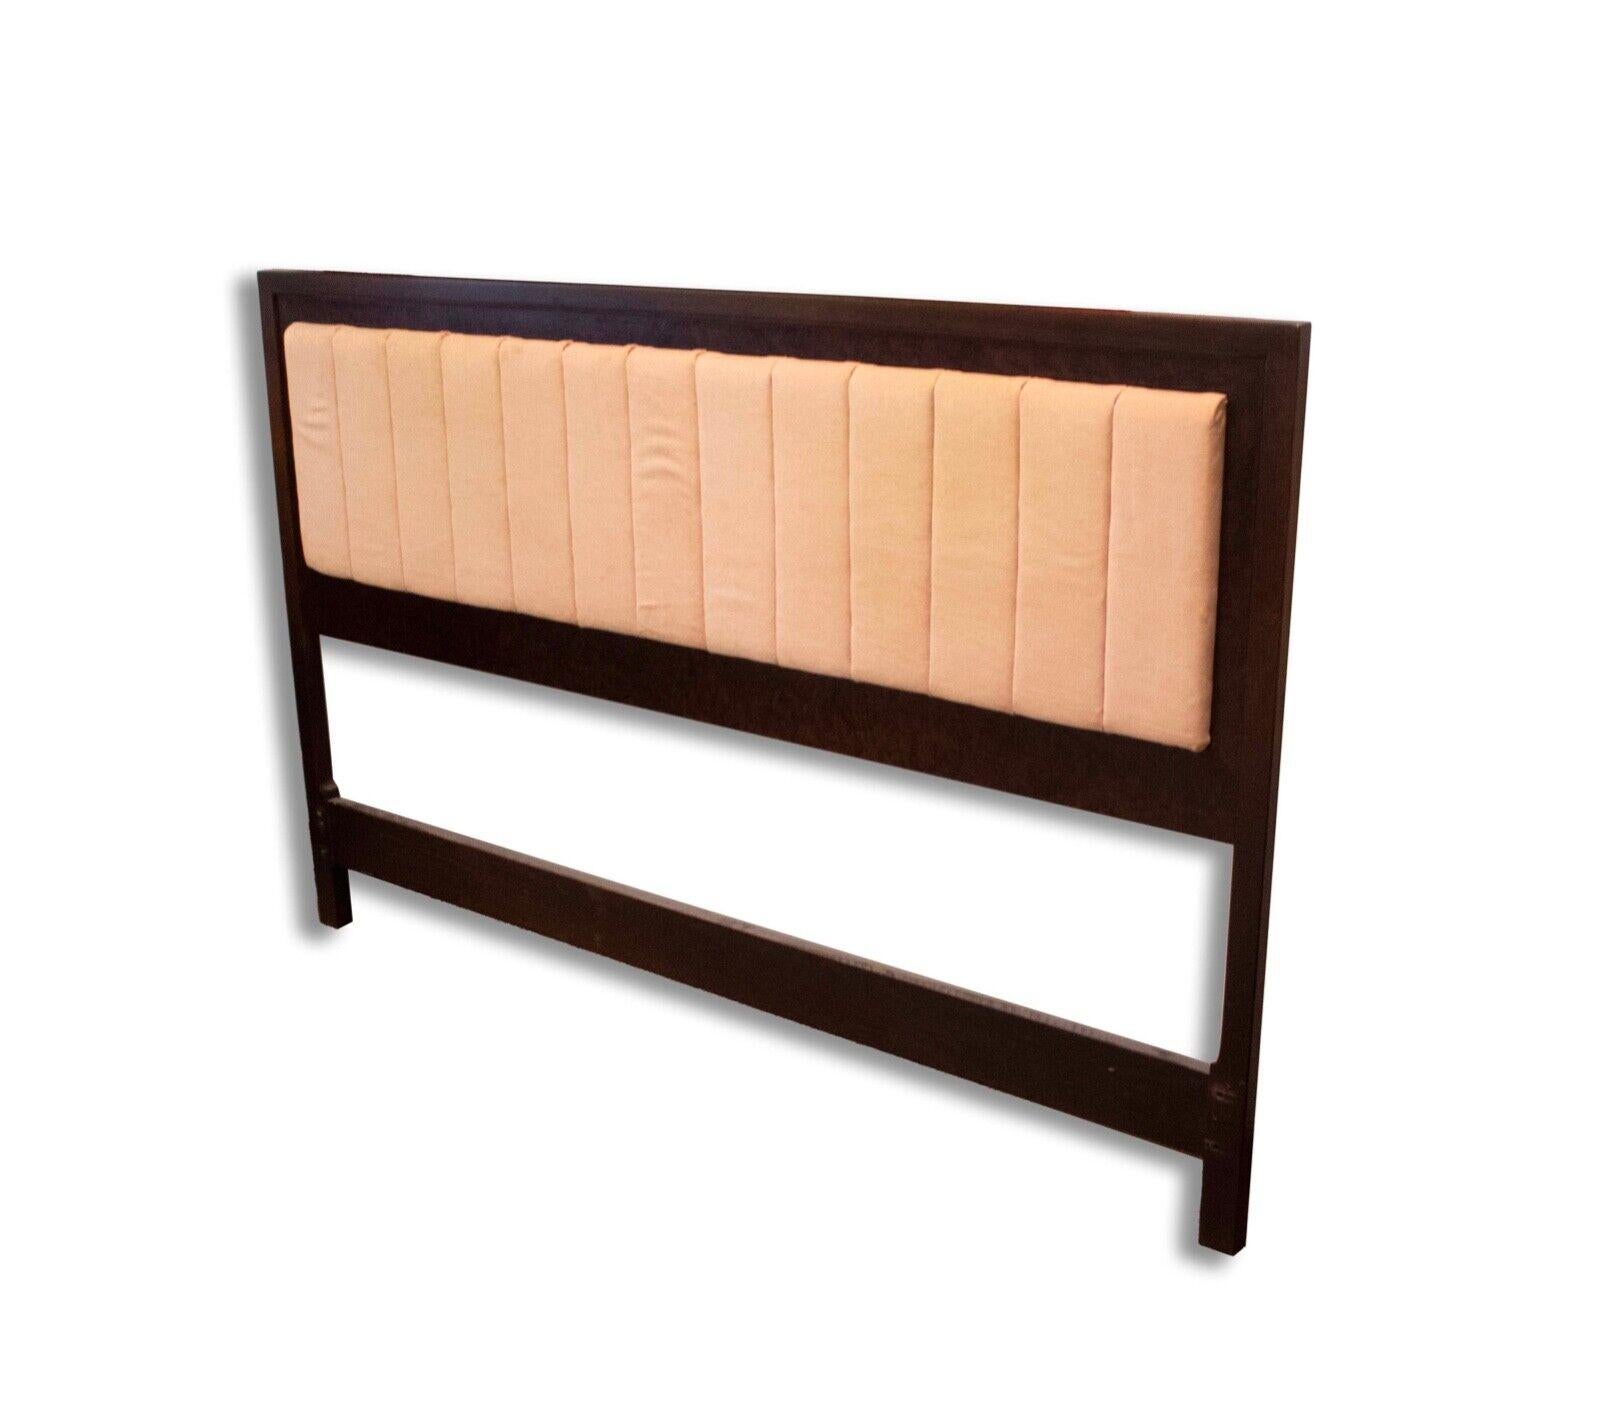 Enhance the allure of your bedroom with the Mount Airy Queen-Sized Headboard. This exquisite piece exudes elegance and charm with its refined design and meticulous craftsmanship. The headboard features a sleek silhouette and a rich walnut finish